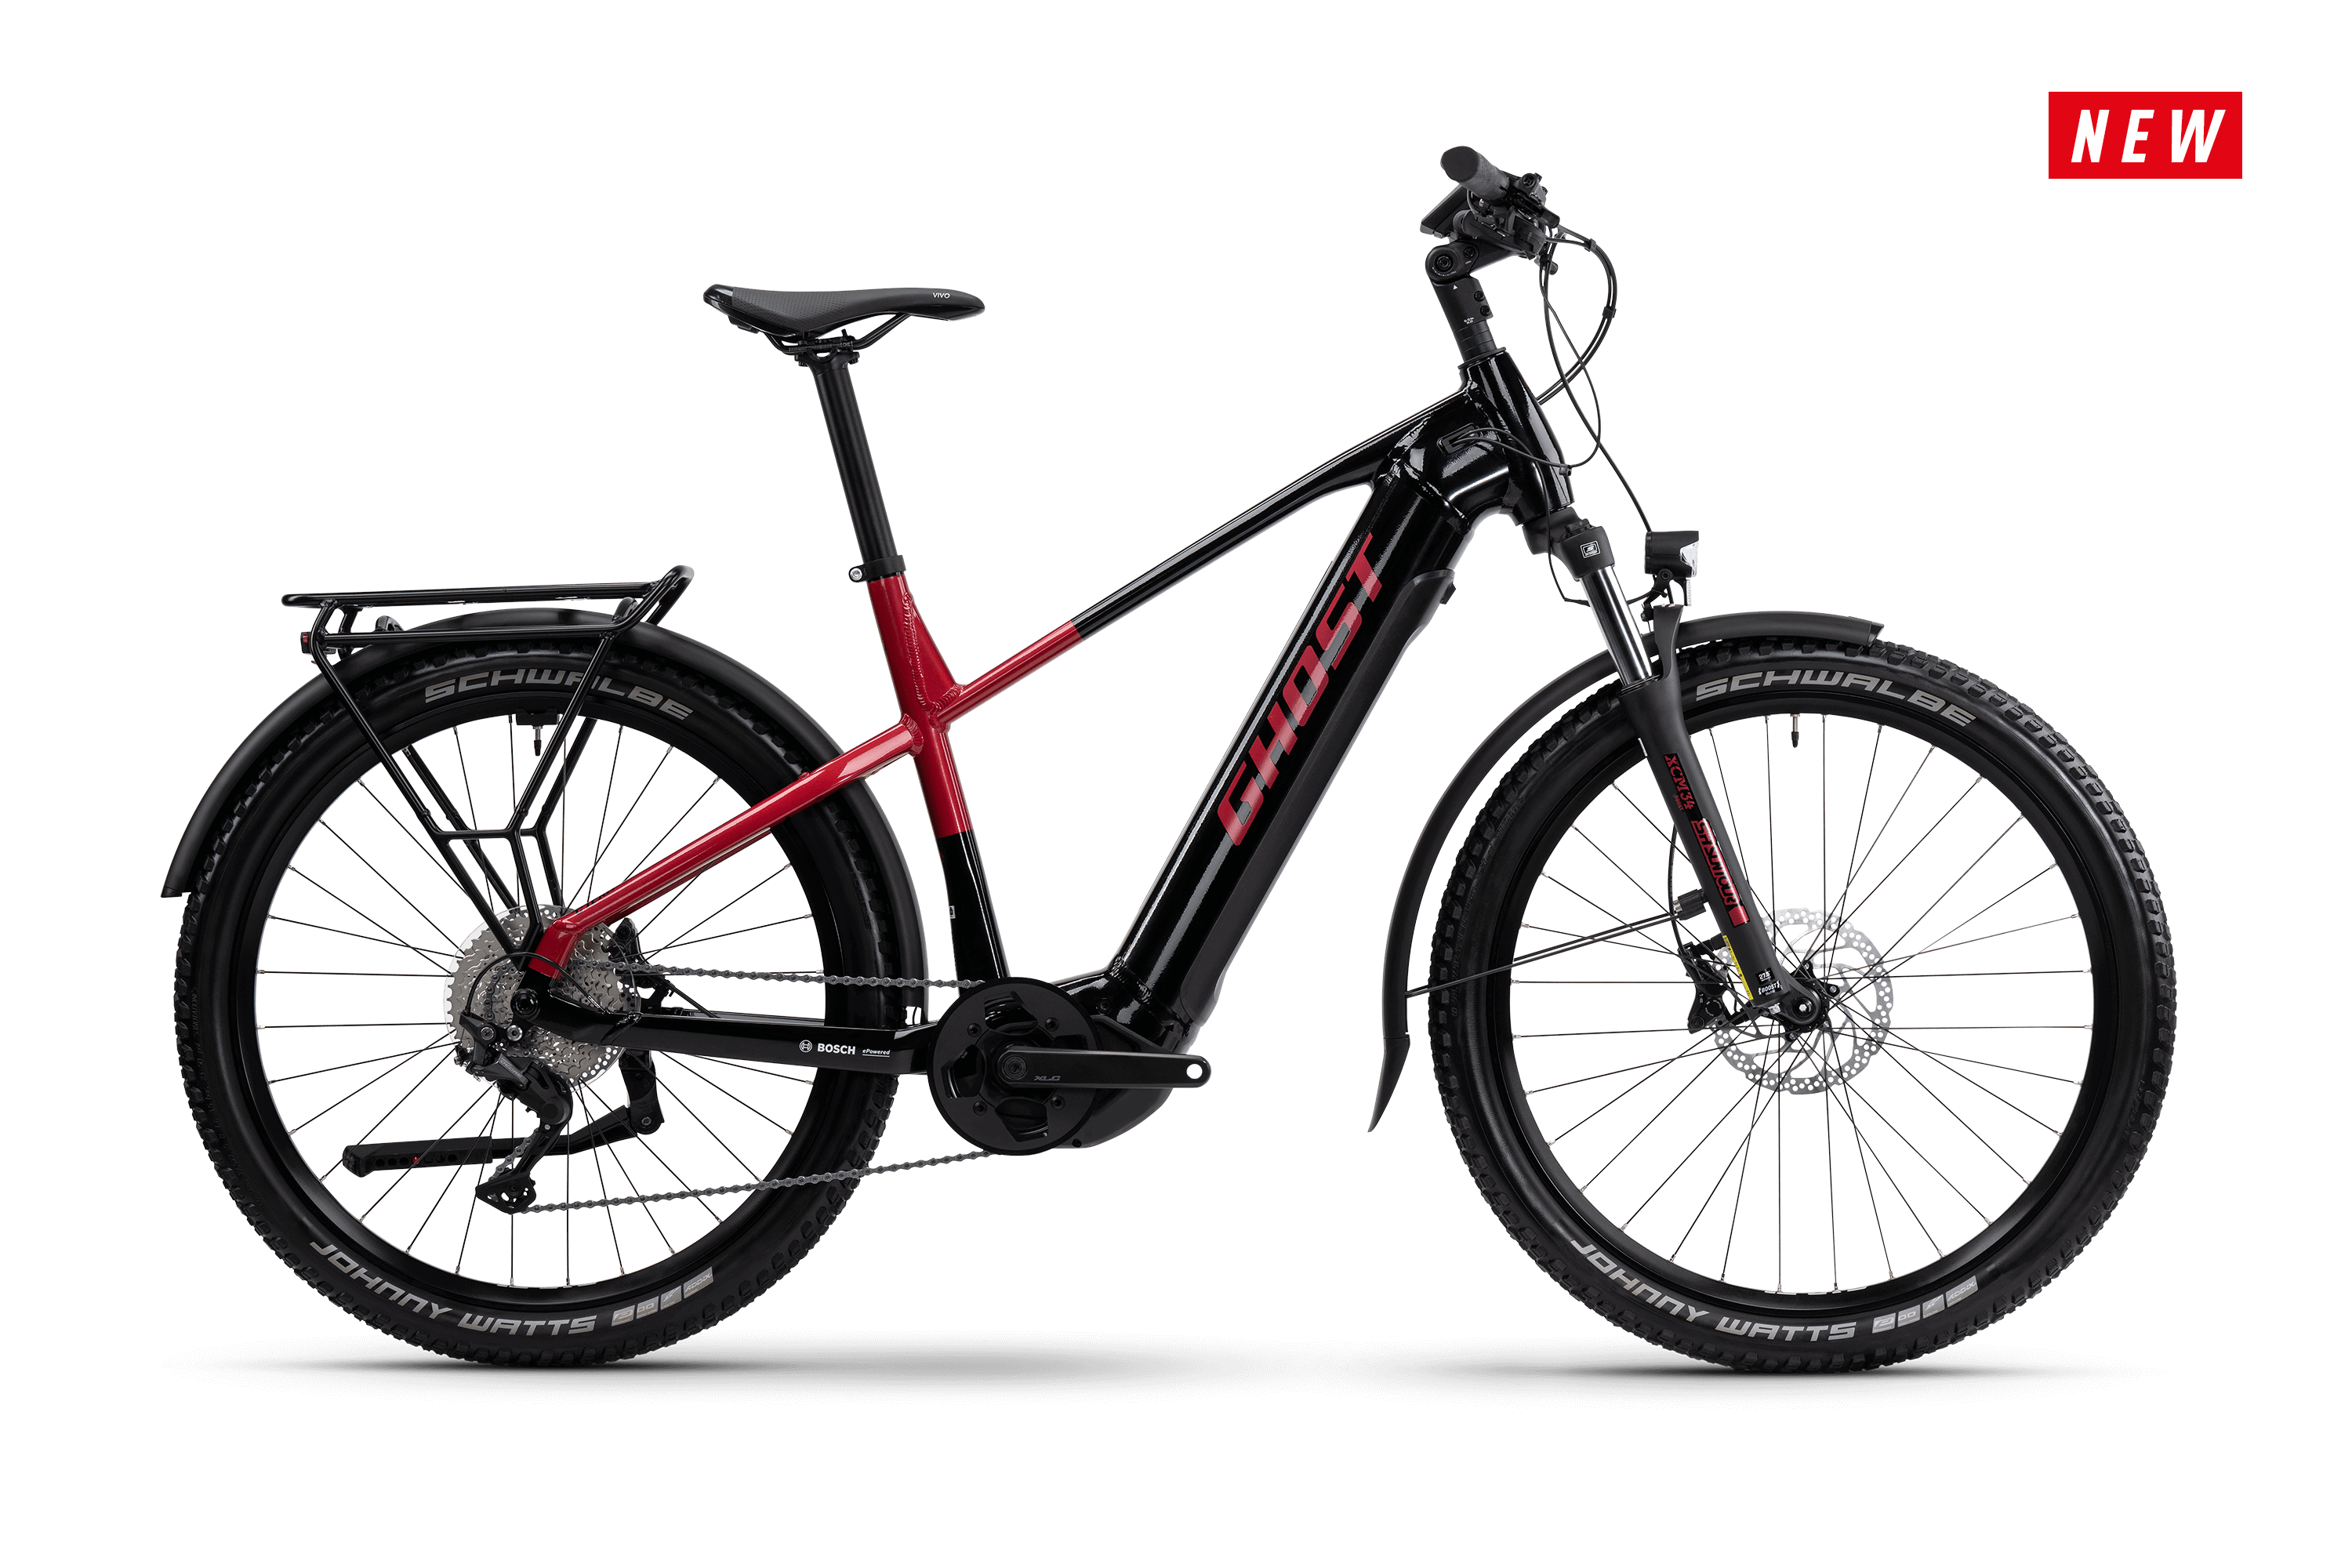 GHOST Electric Mountain Bikes: Made for any terrain